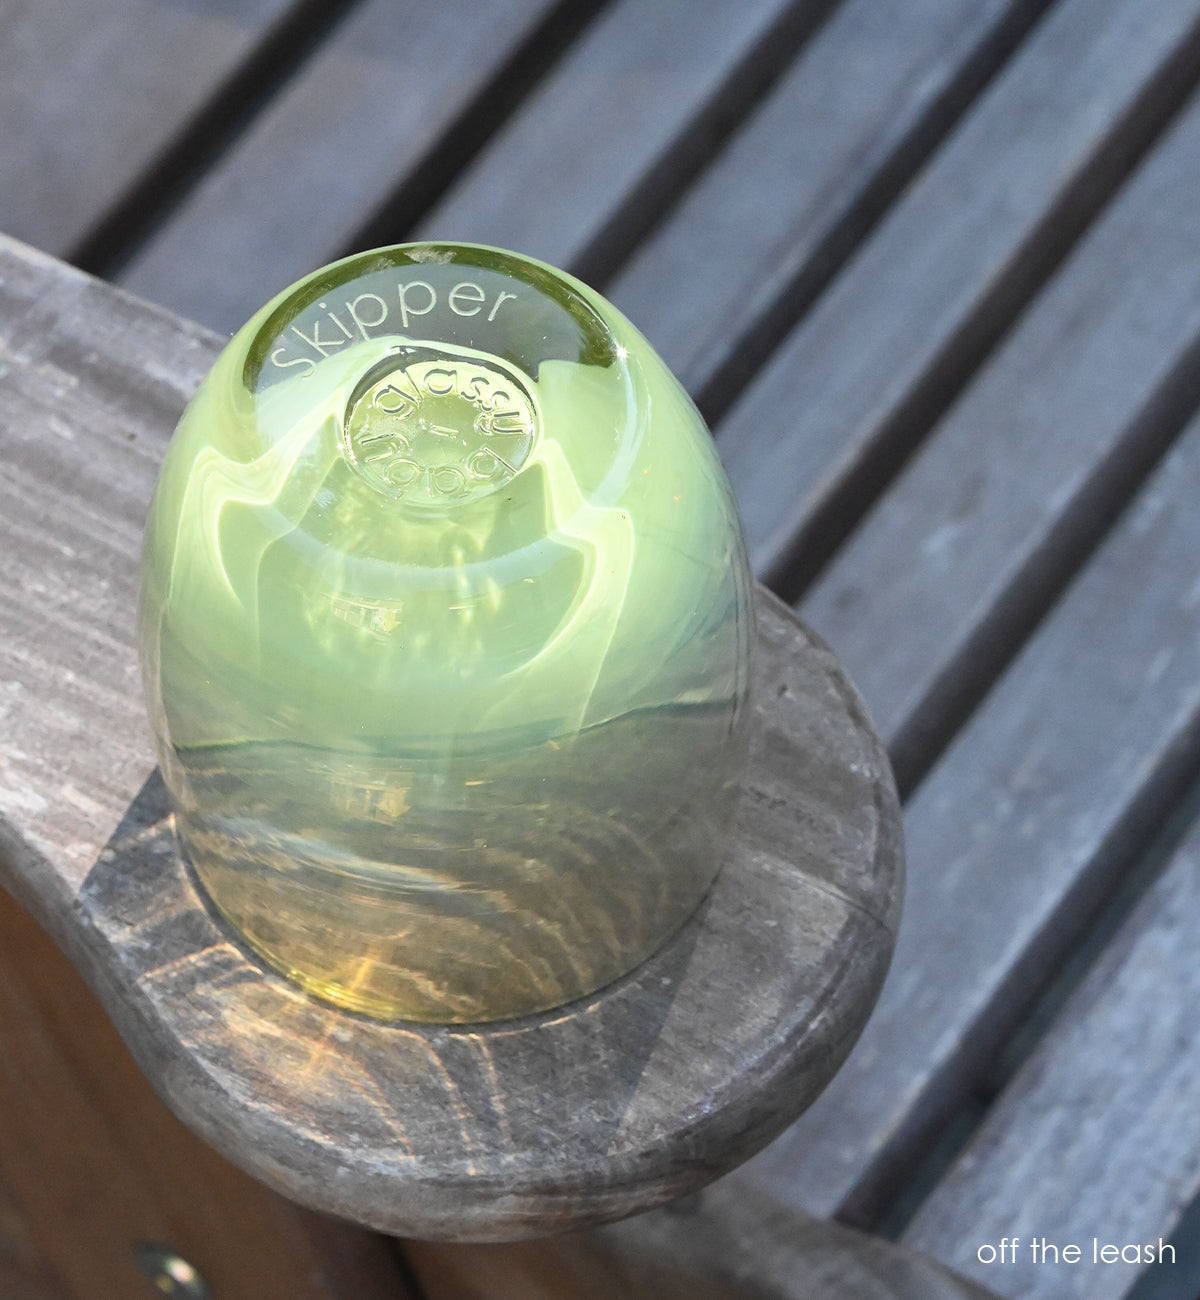 off the leash is a moss green hand-blown glass votive candle holder. transparent towards the top. bottom etched with "skipper"